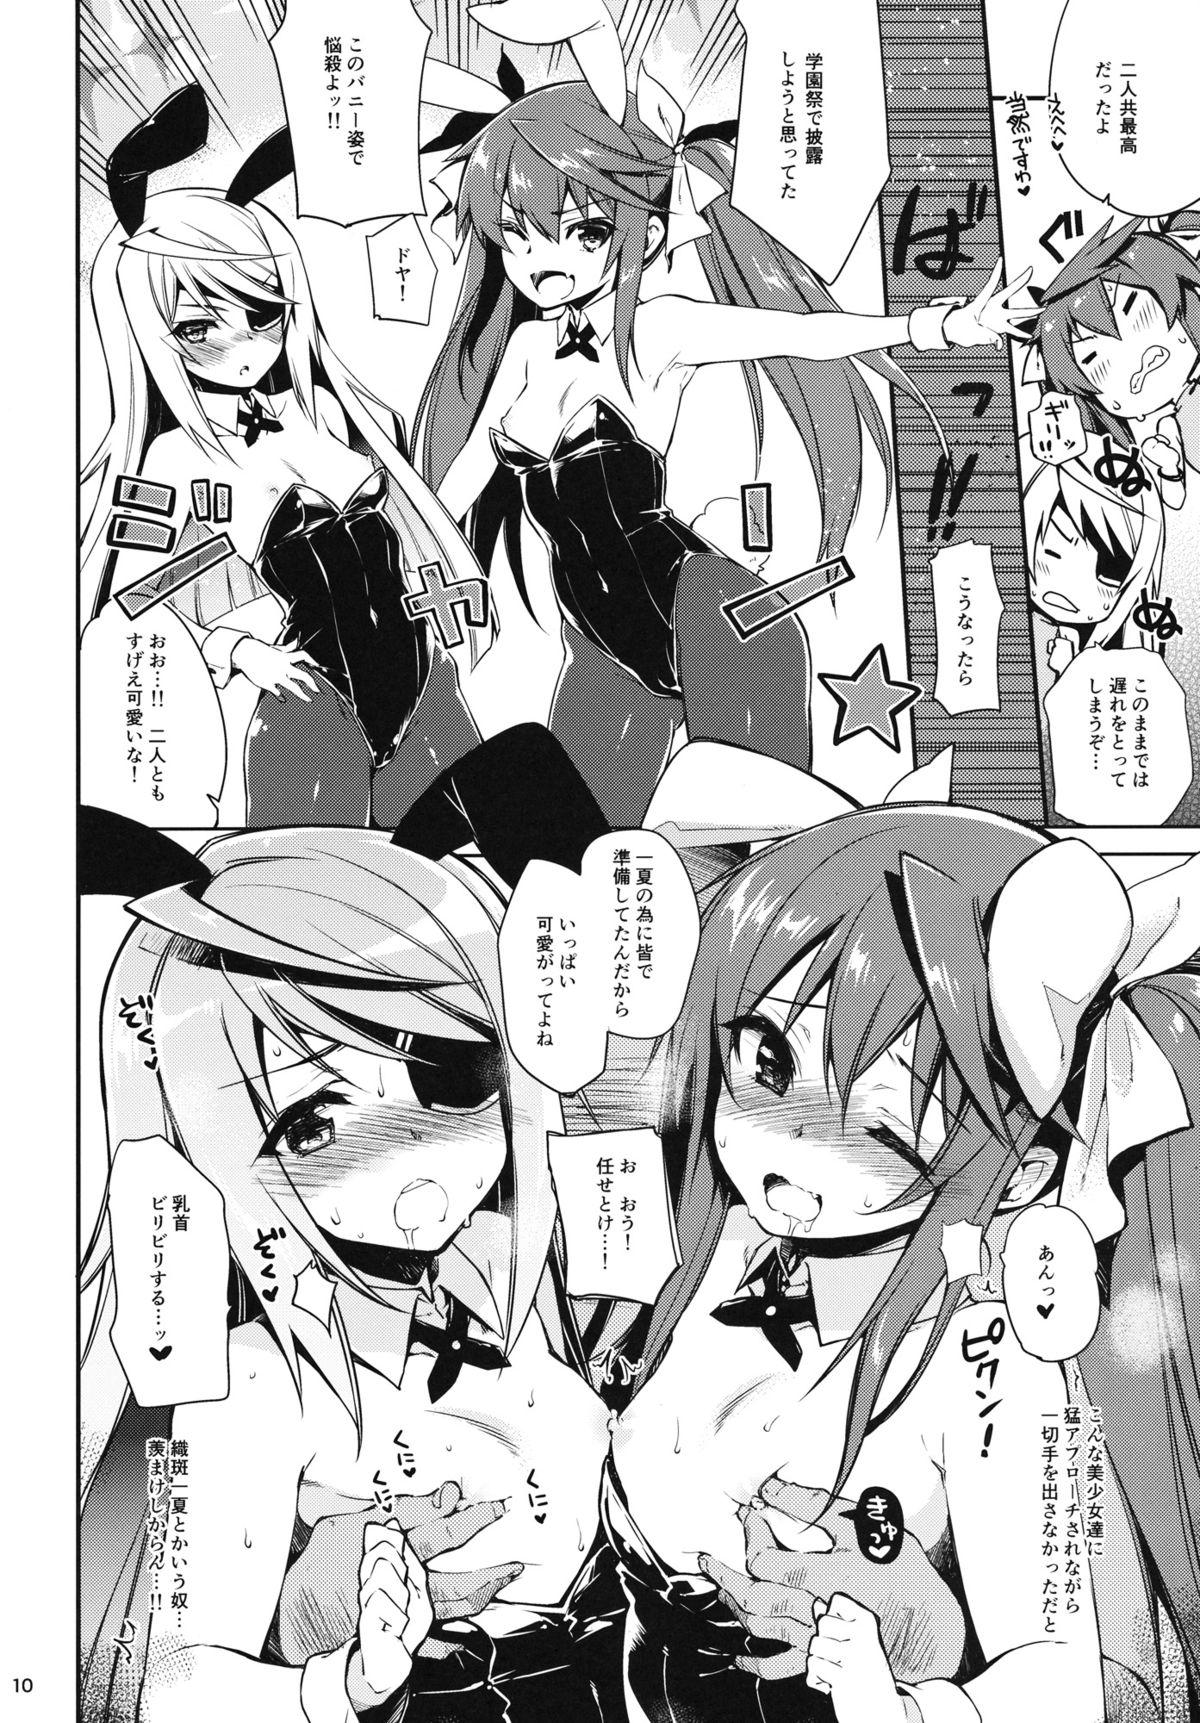 Soapy ONE night SUMMER - Infinite stratos Bang - Page 9